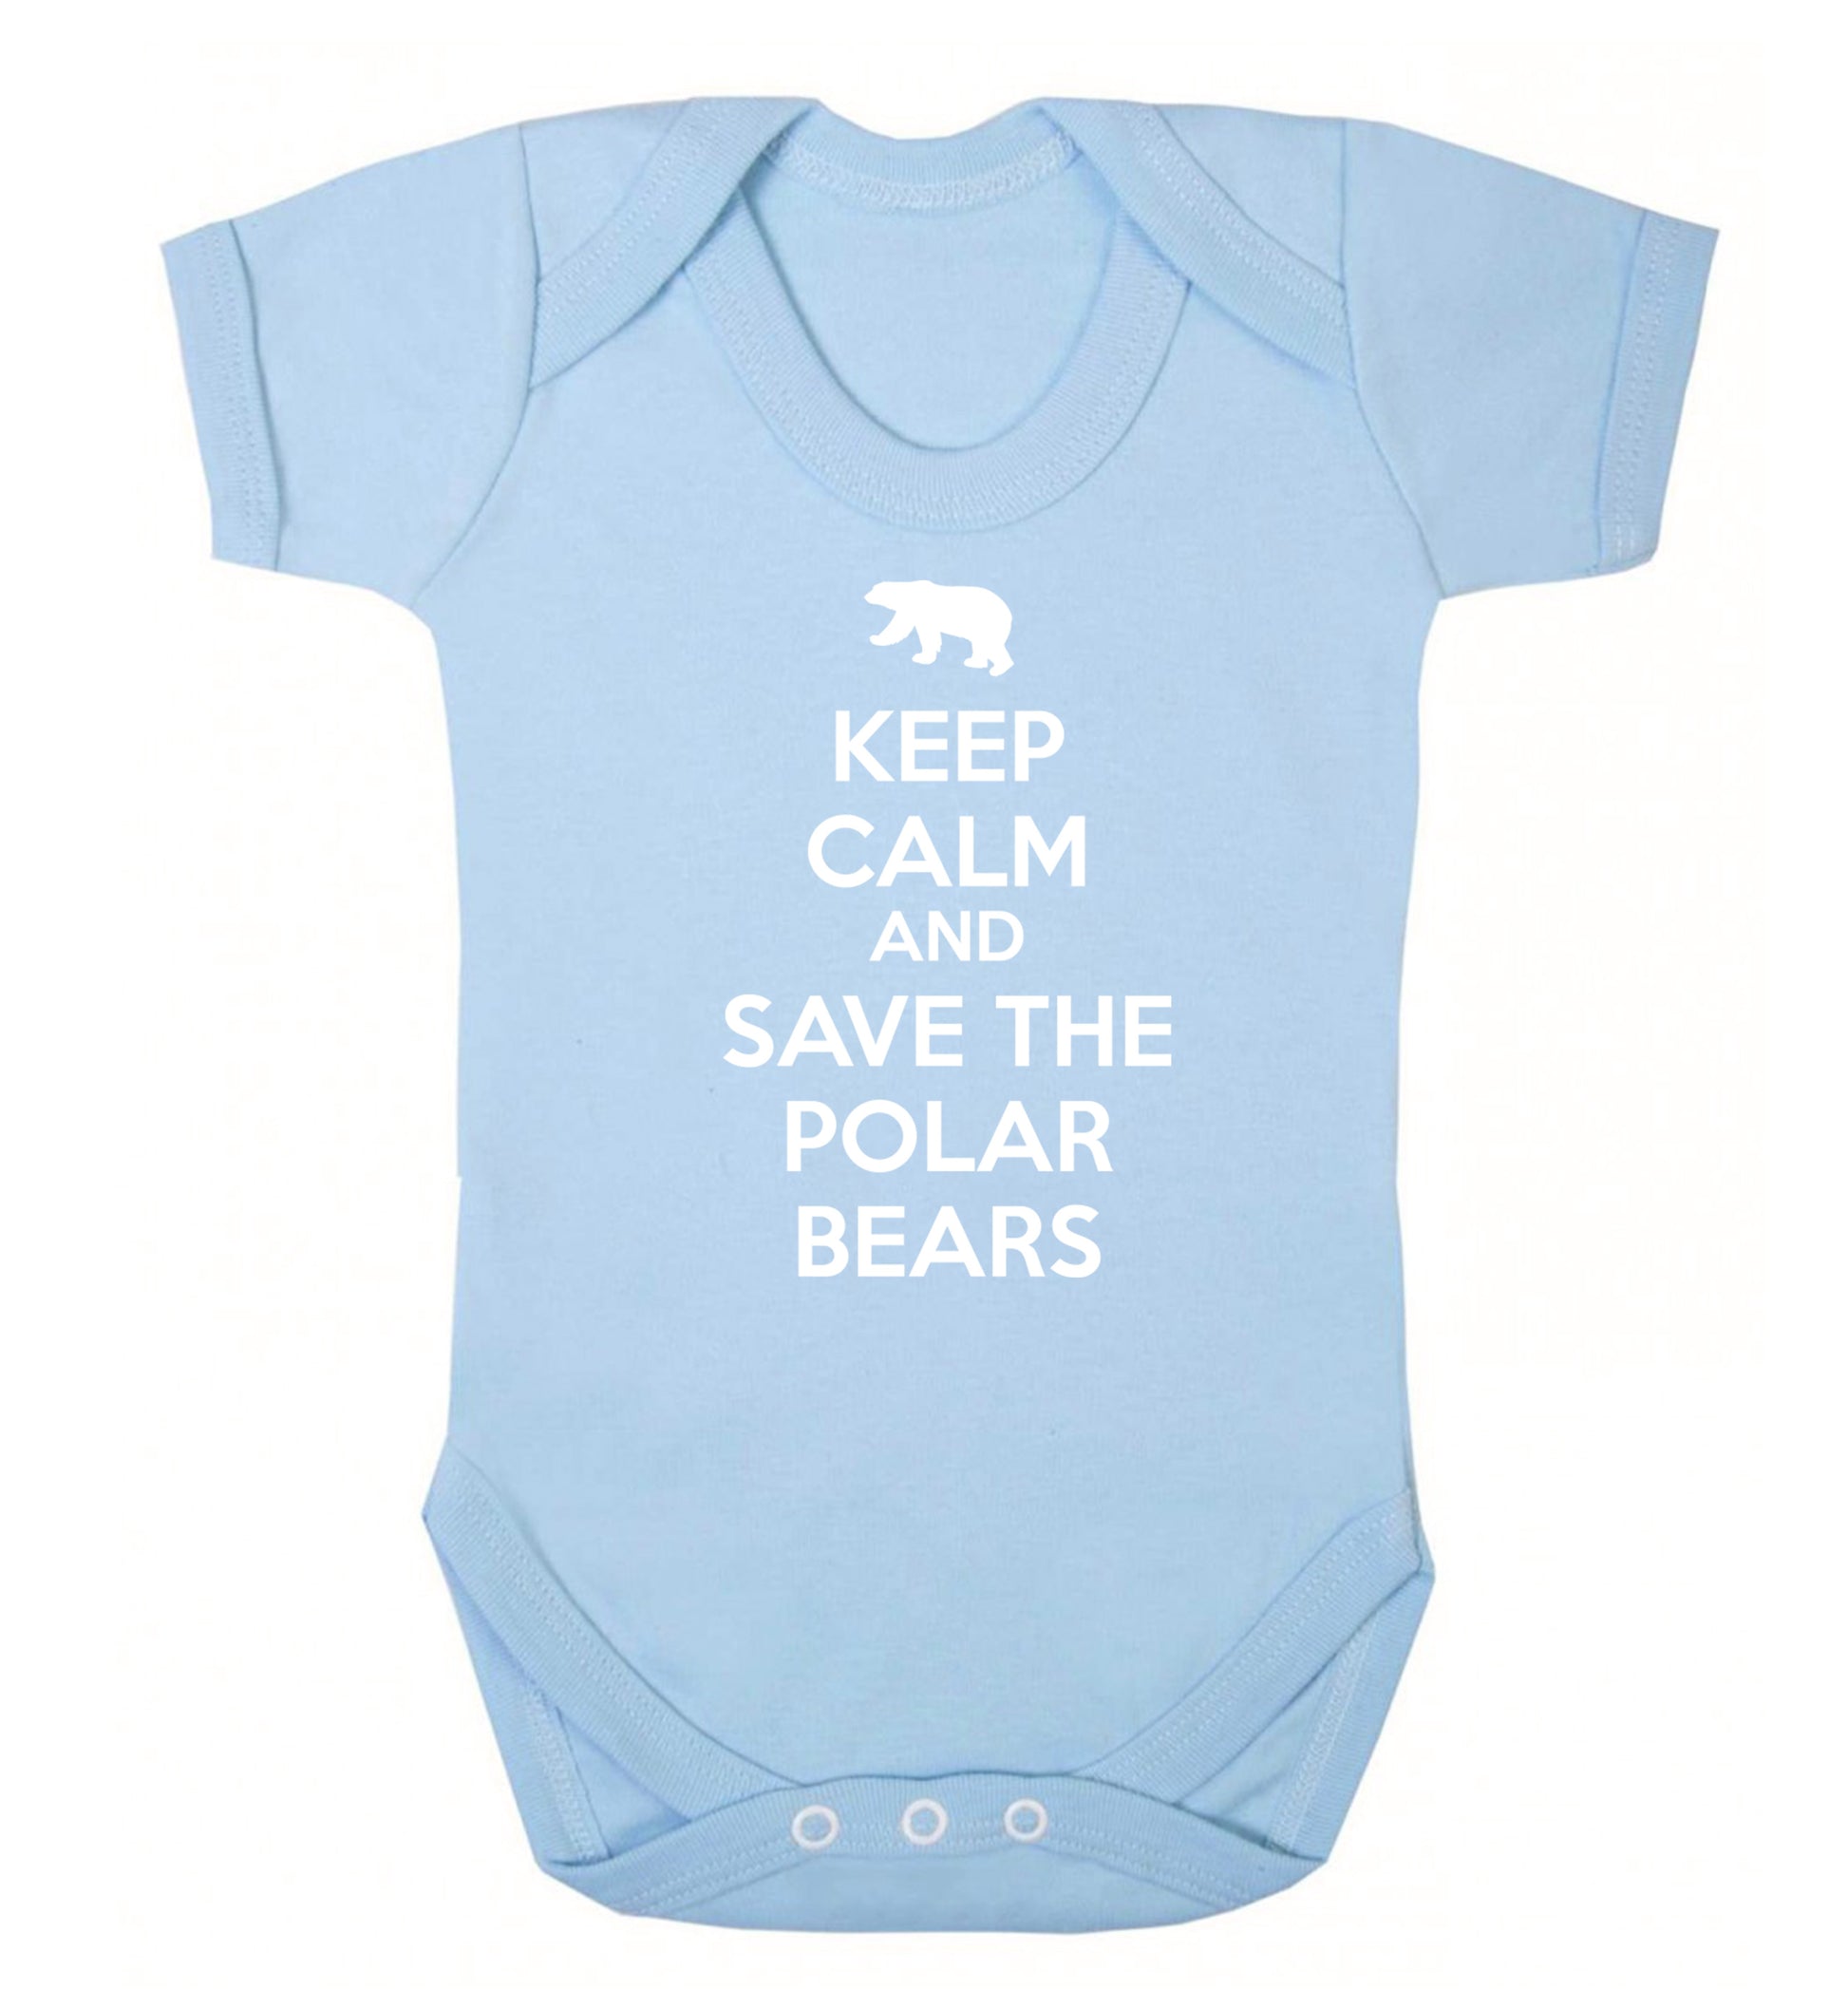 Keep calm and save the polar bears Baby Vest pale blue 18-24 months